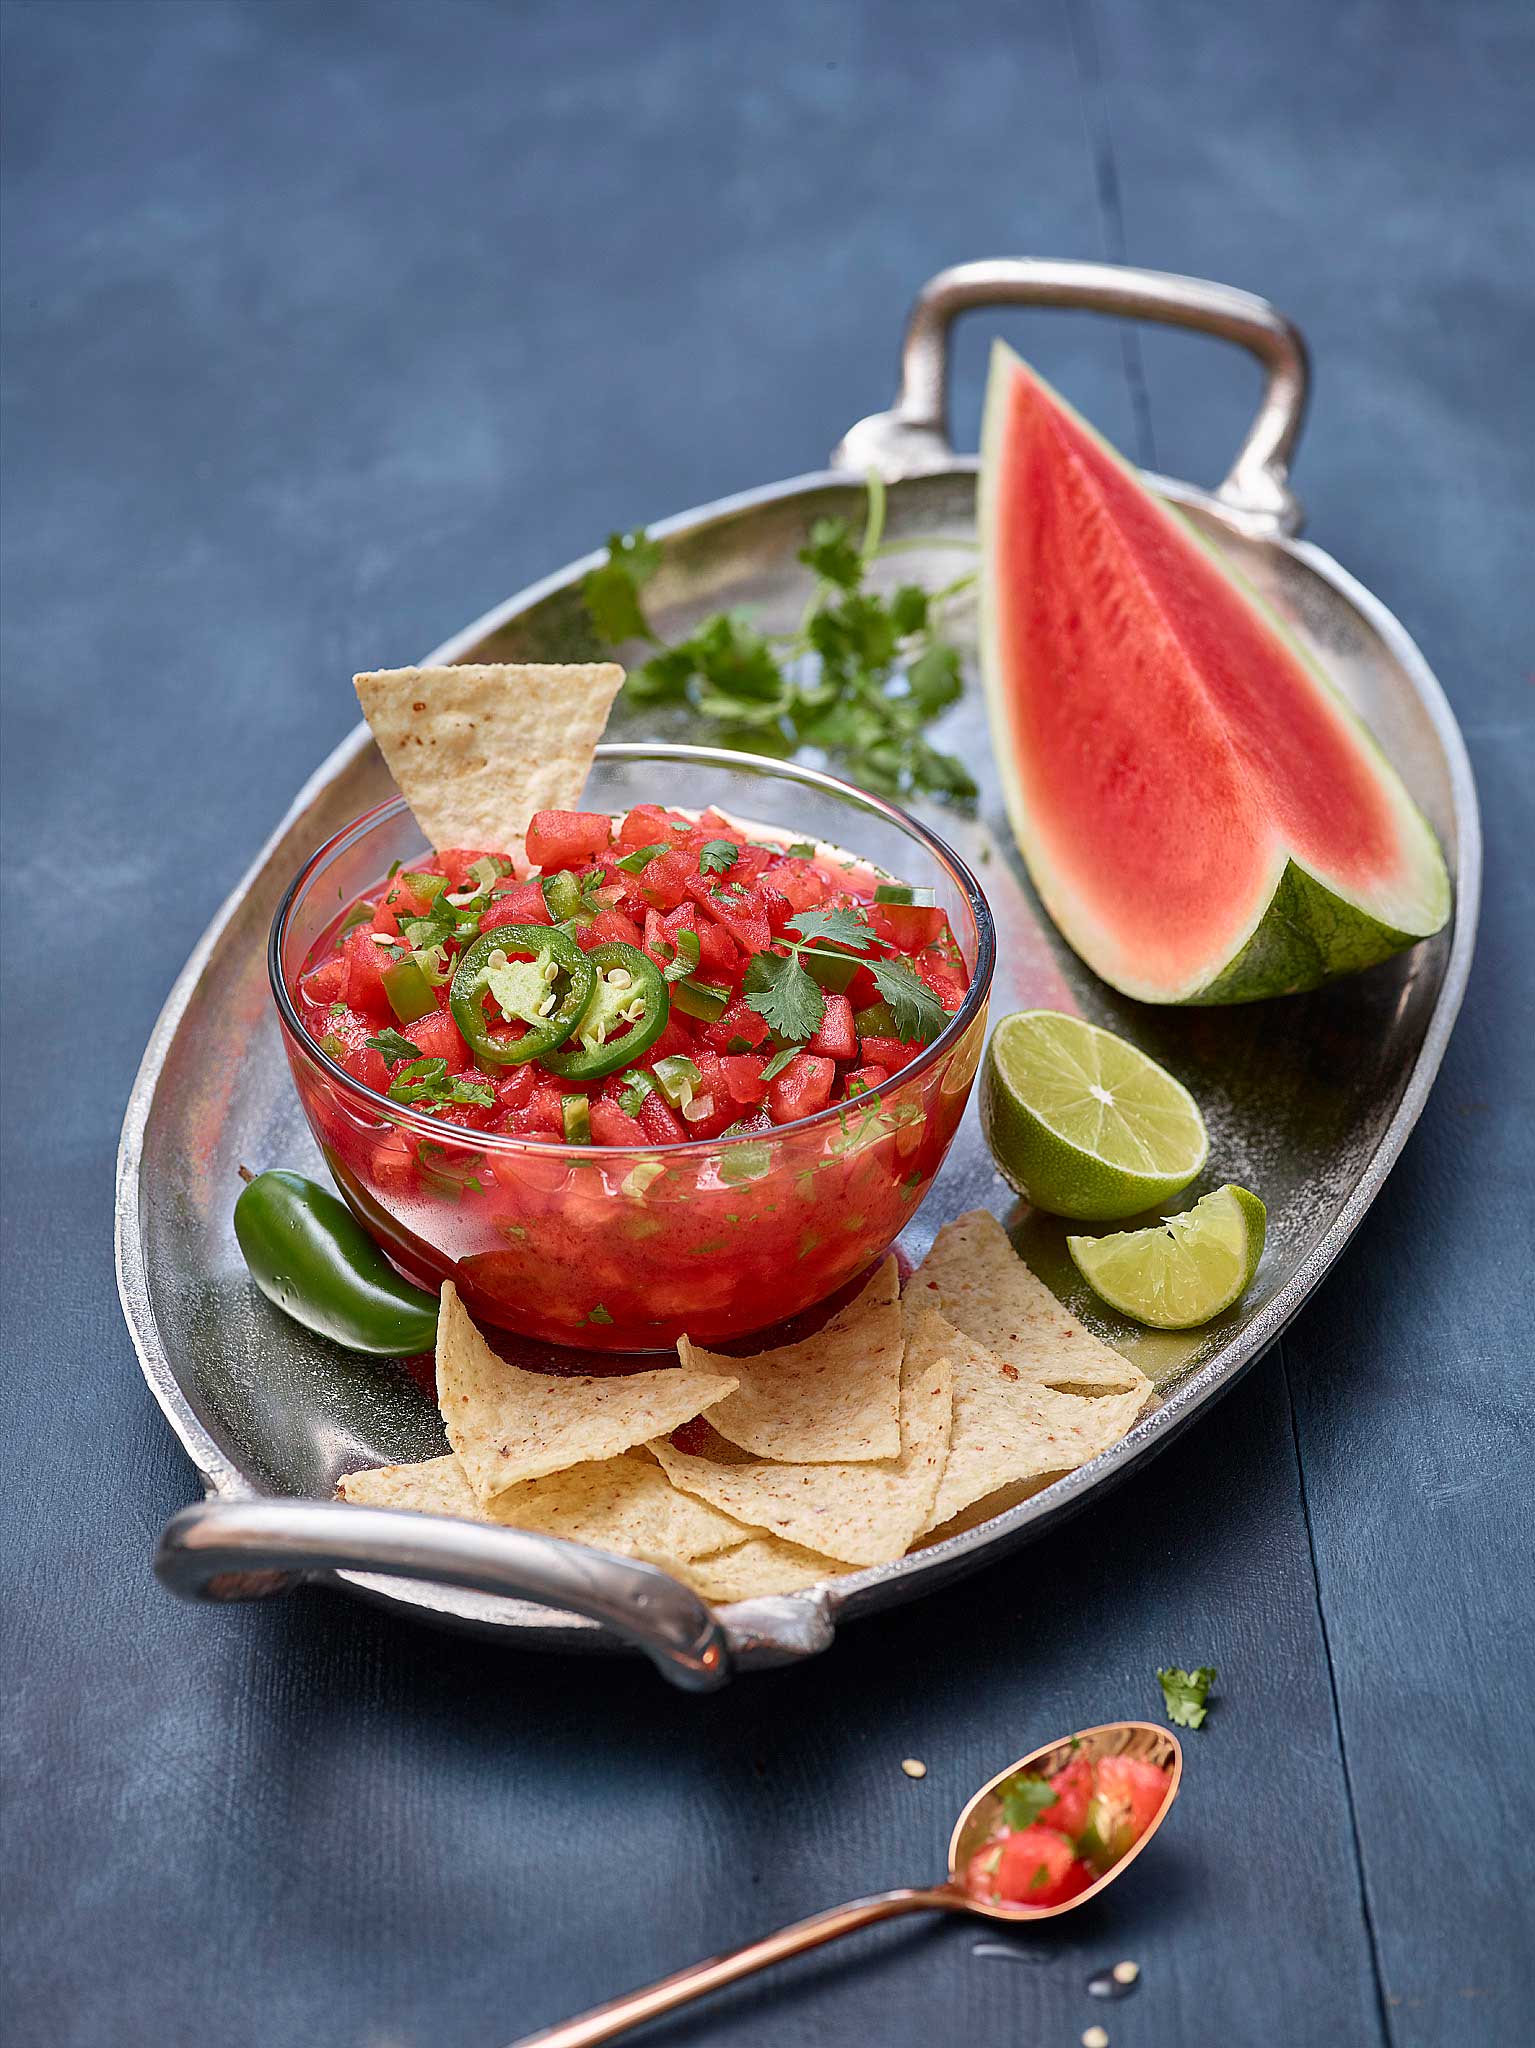 Photo of a plate containing a  wedge of watermelon, half a lime, a bowl of watermelon salsa and tortilla chips.